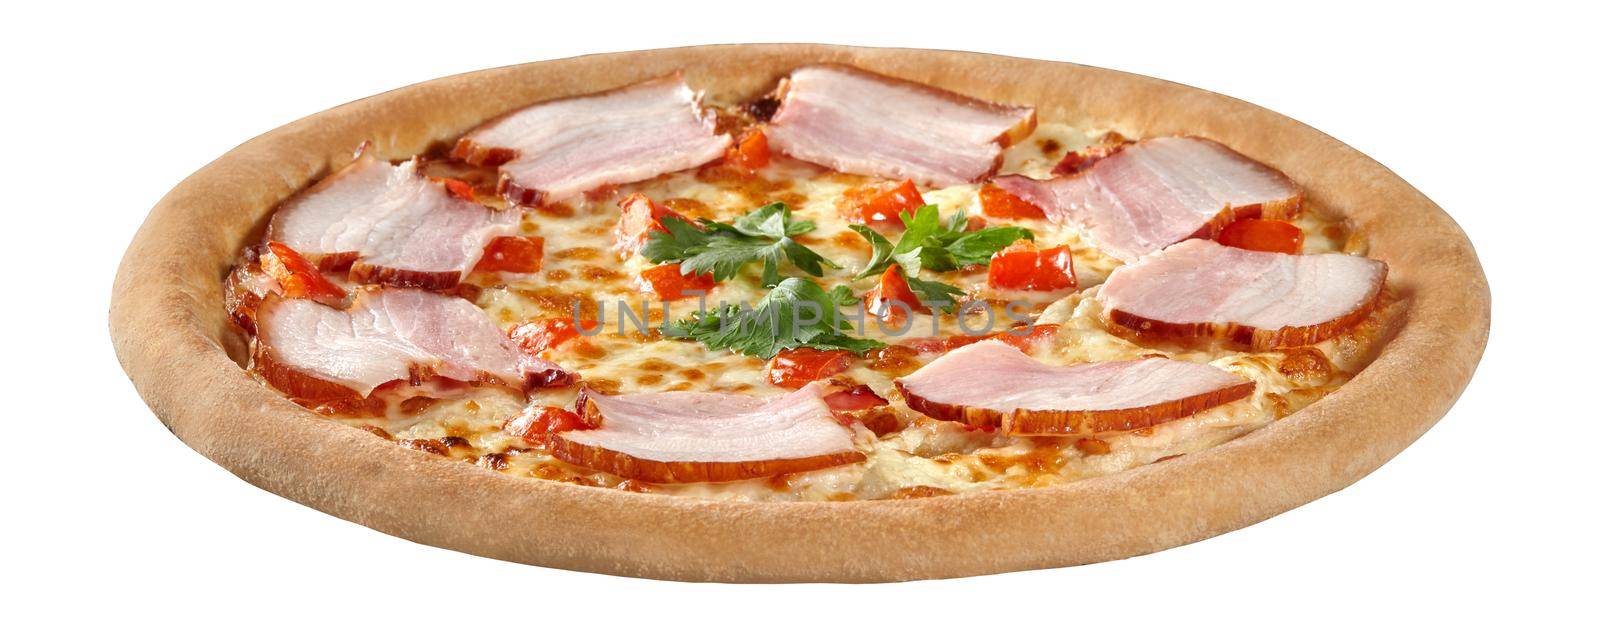 Closeup of pizza with cream cheese sauce, bacon, tomatoes and greens isolated on white by nazarovsergey